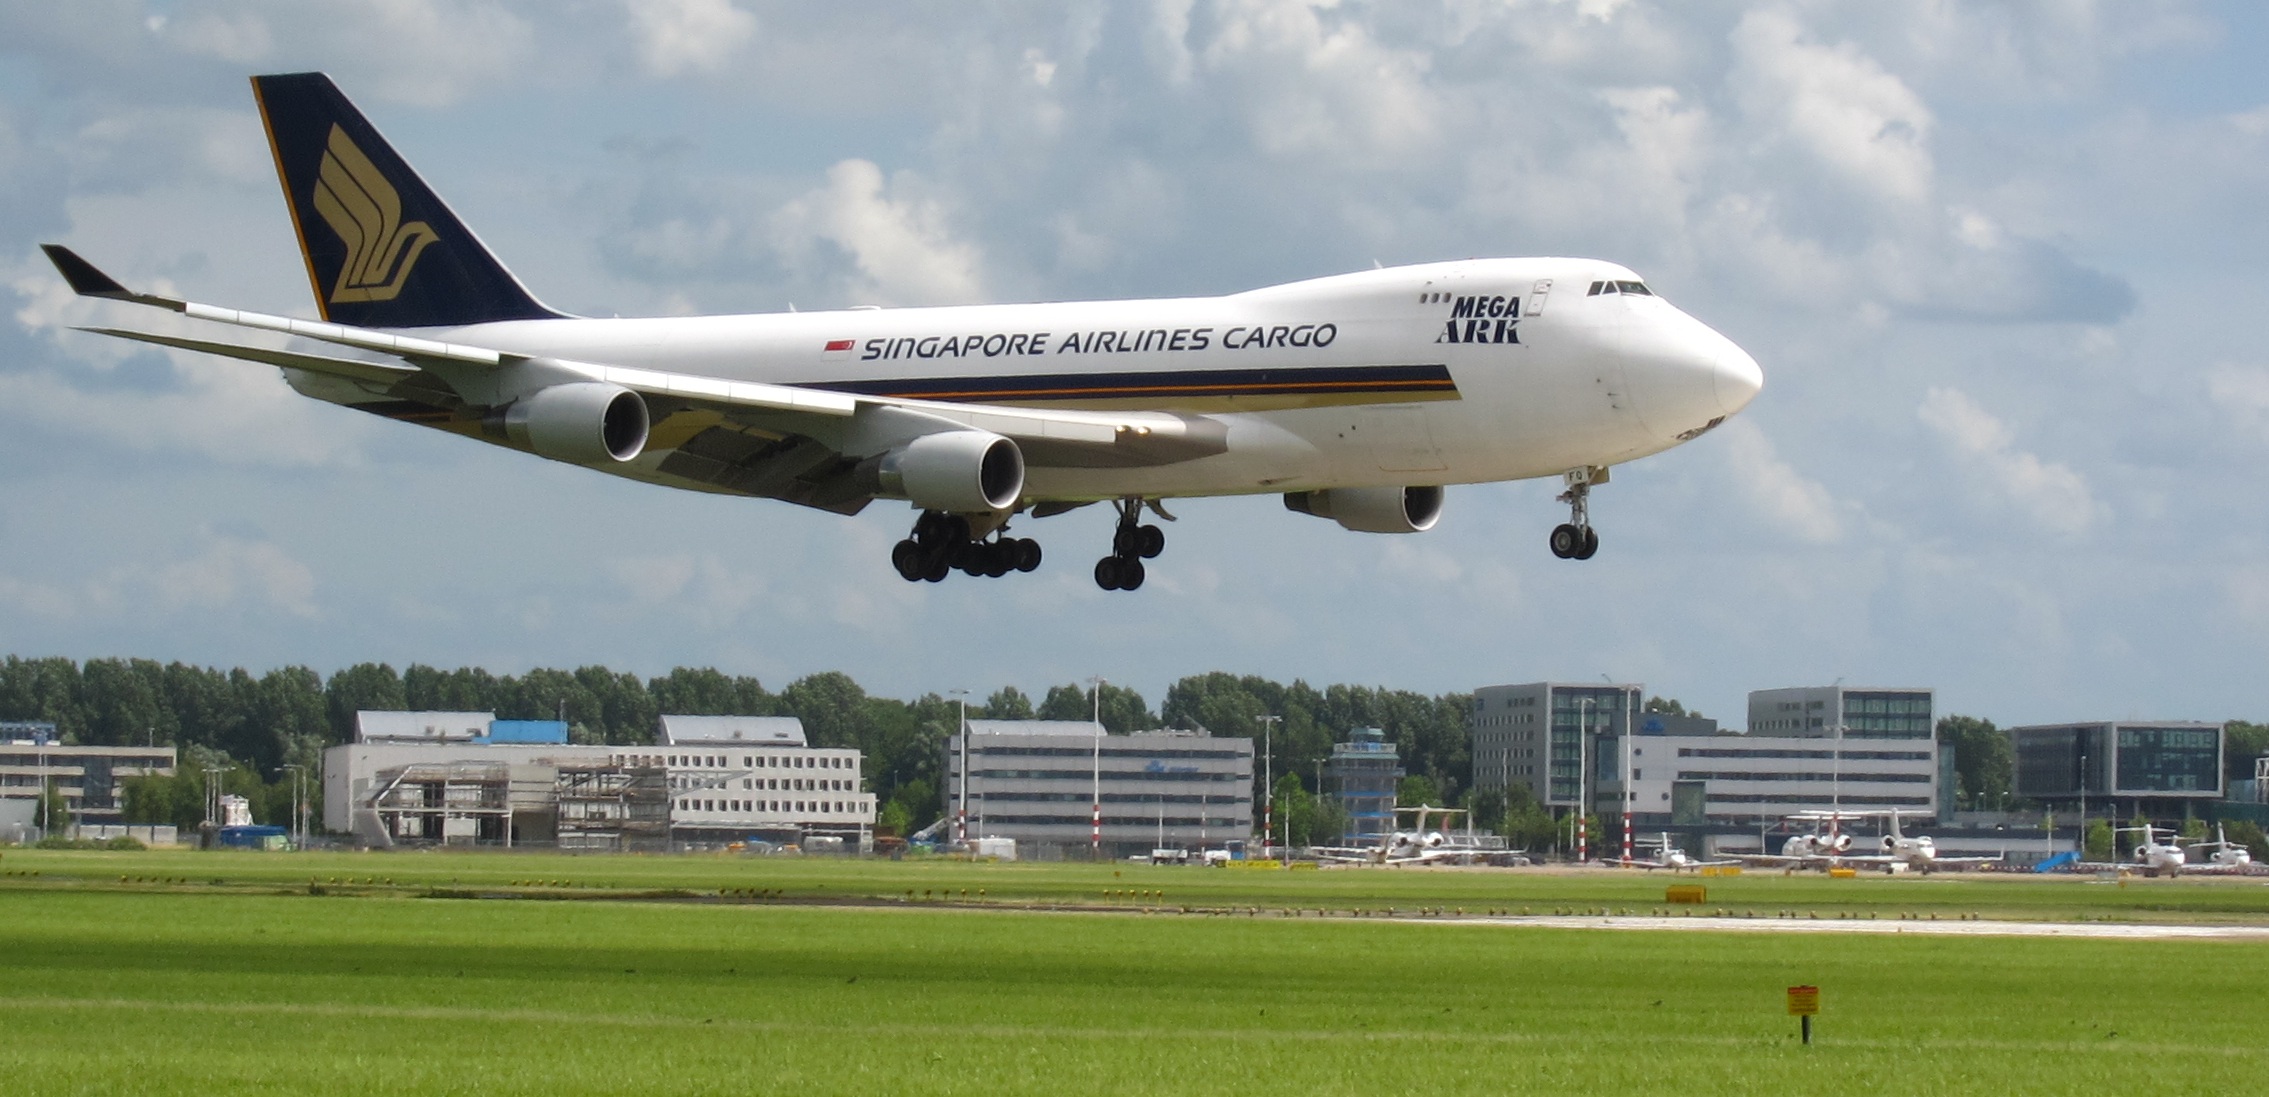 Singapore Airlines Cargo 747 landing at Schiphol